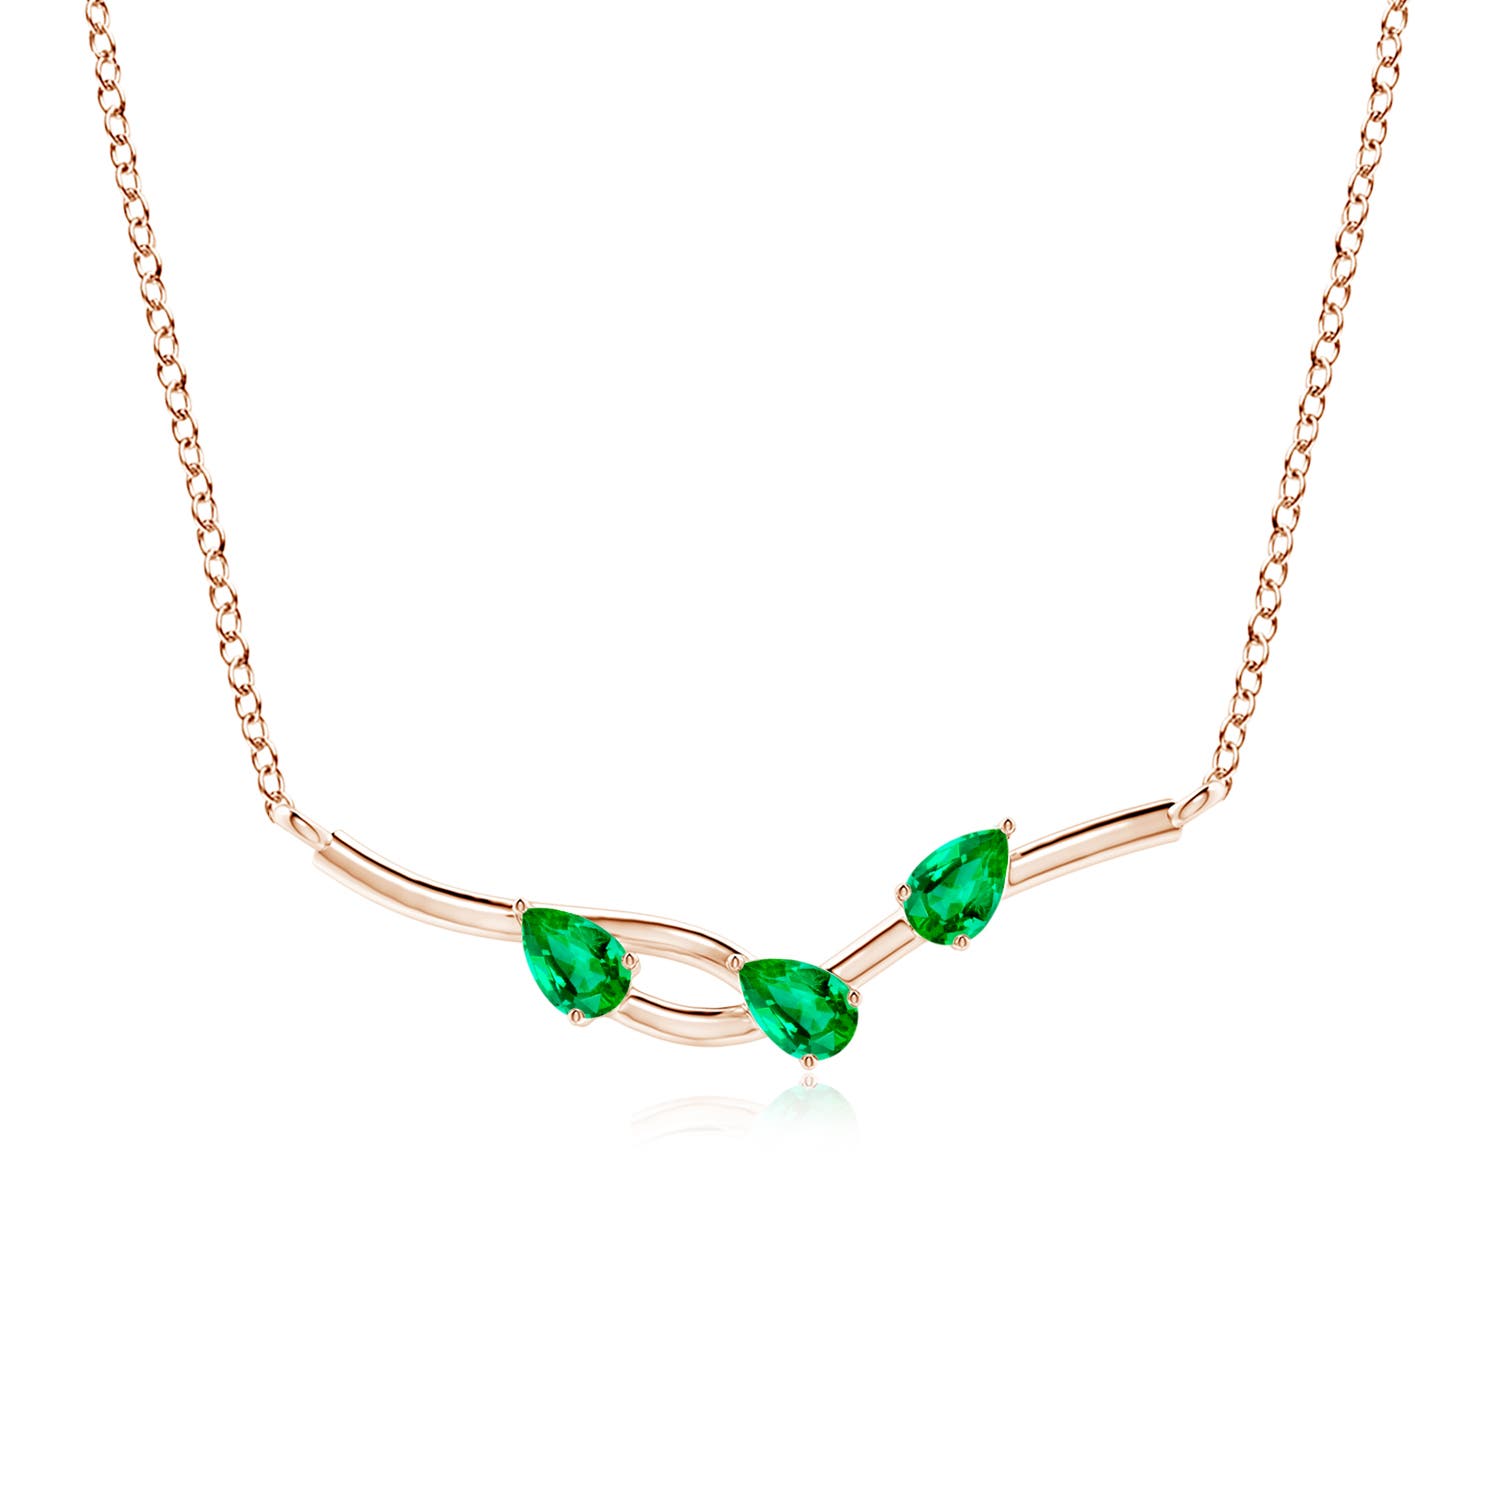 AAA - Emerald / 0.6 CT / 14 KT Rose Gold